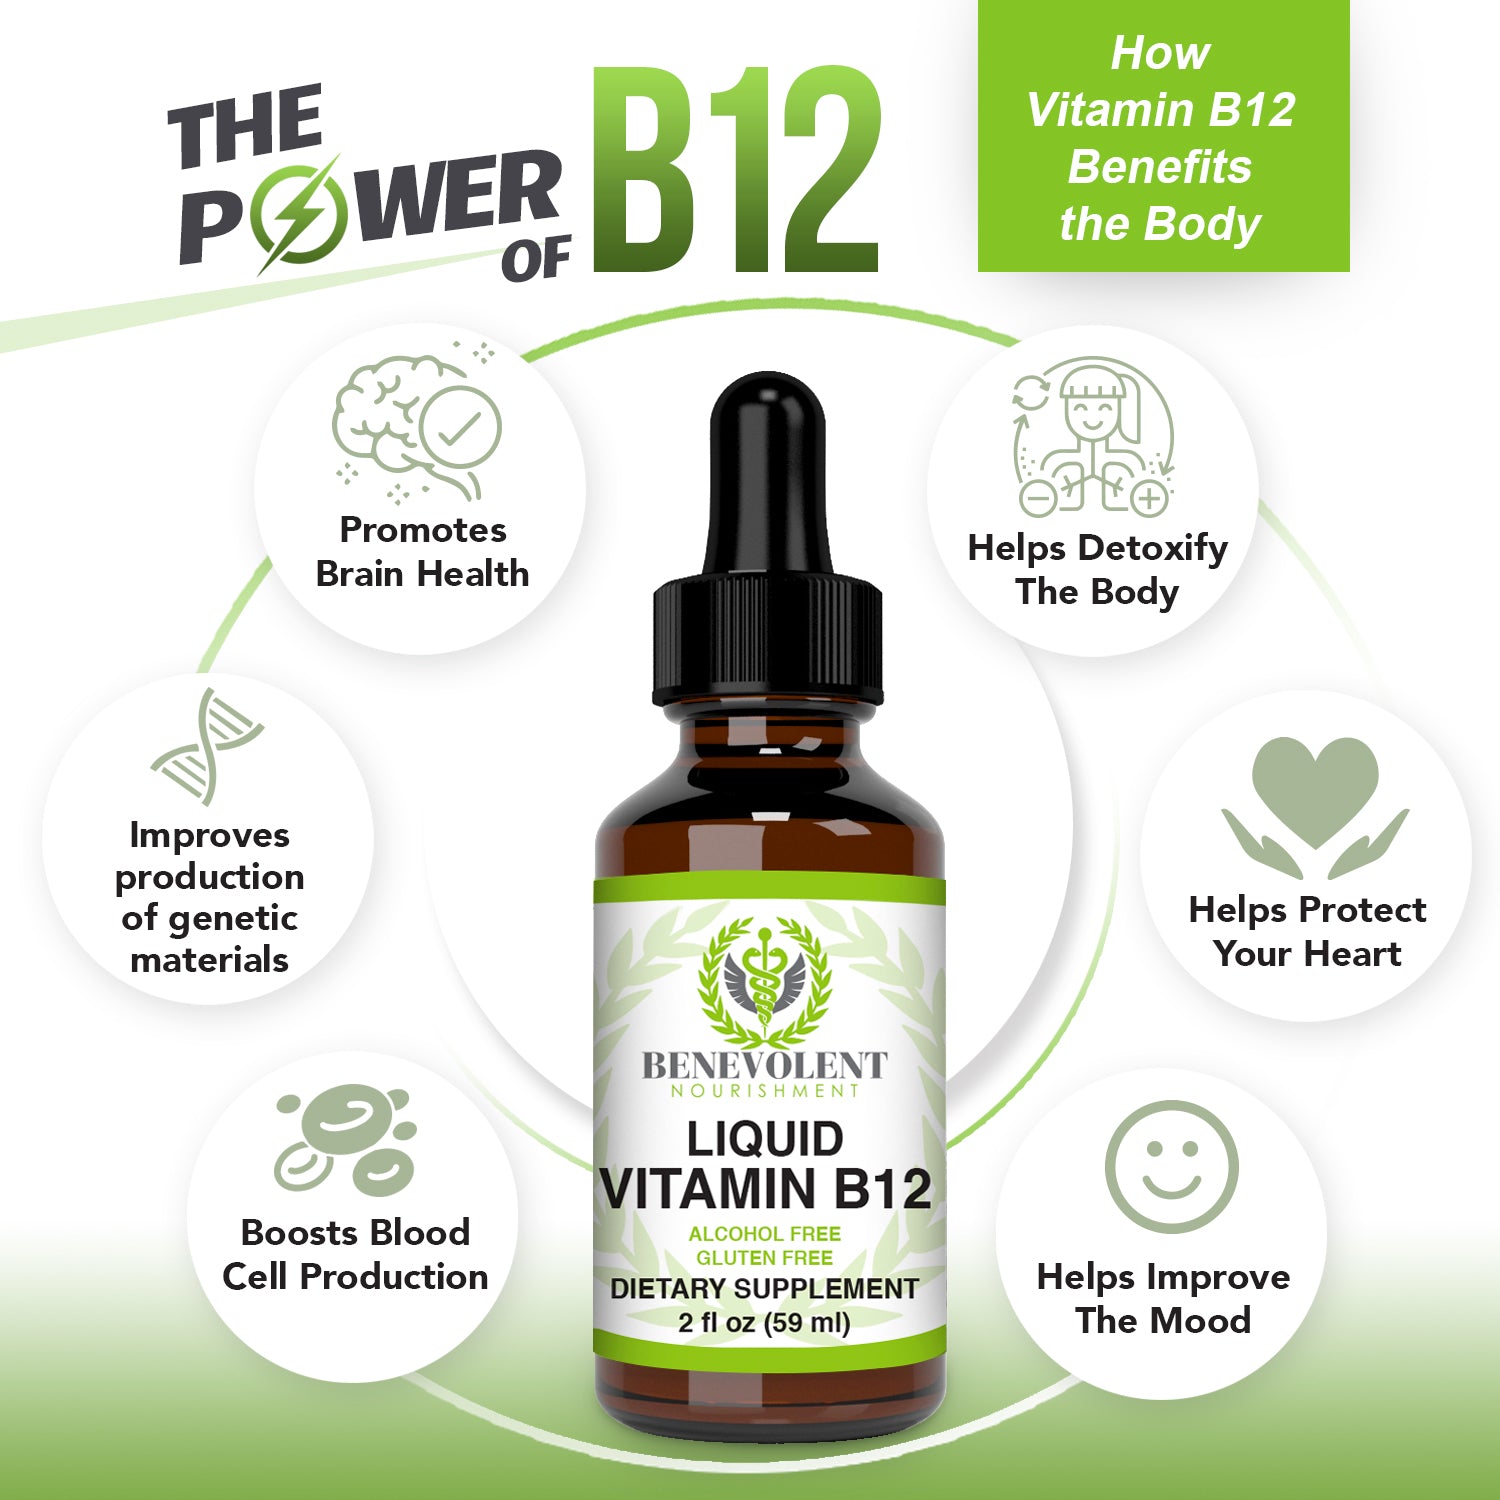 The power of B12